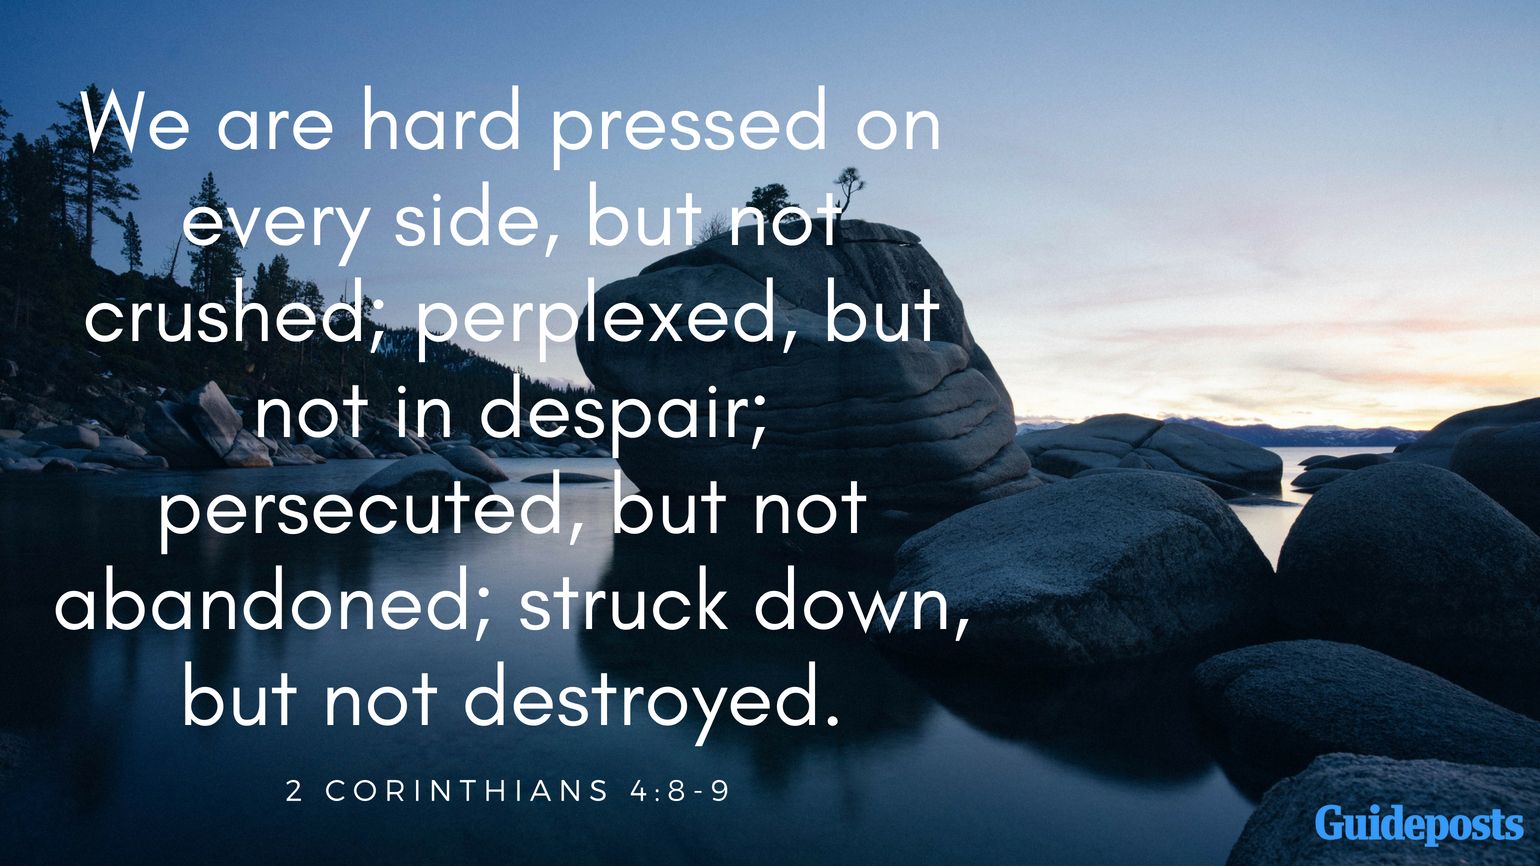 We are hard pressed on every side, but not crushed; perplexed, but not in despair; persecuted, but not abandoned; struck down, but not destroyed. 2 Corinthians 4:8-9